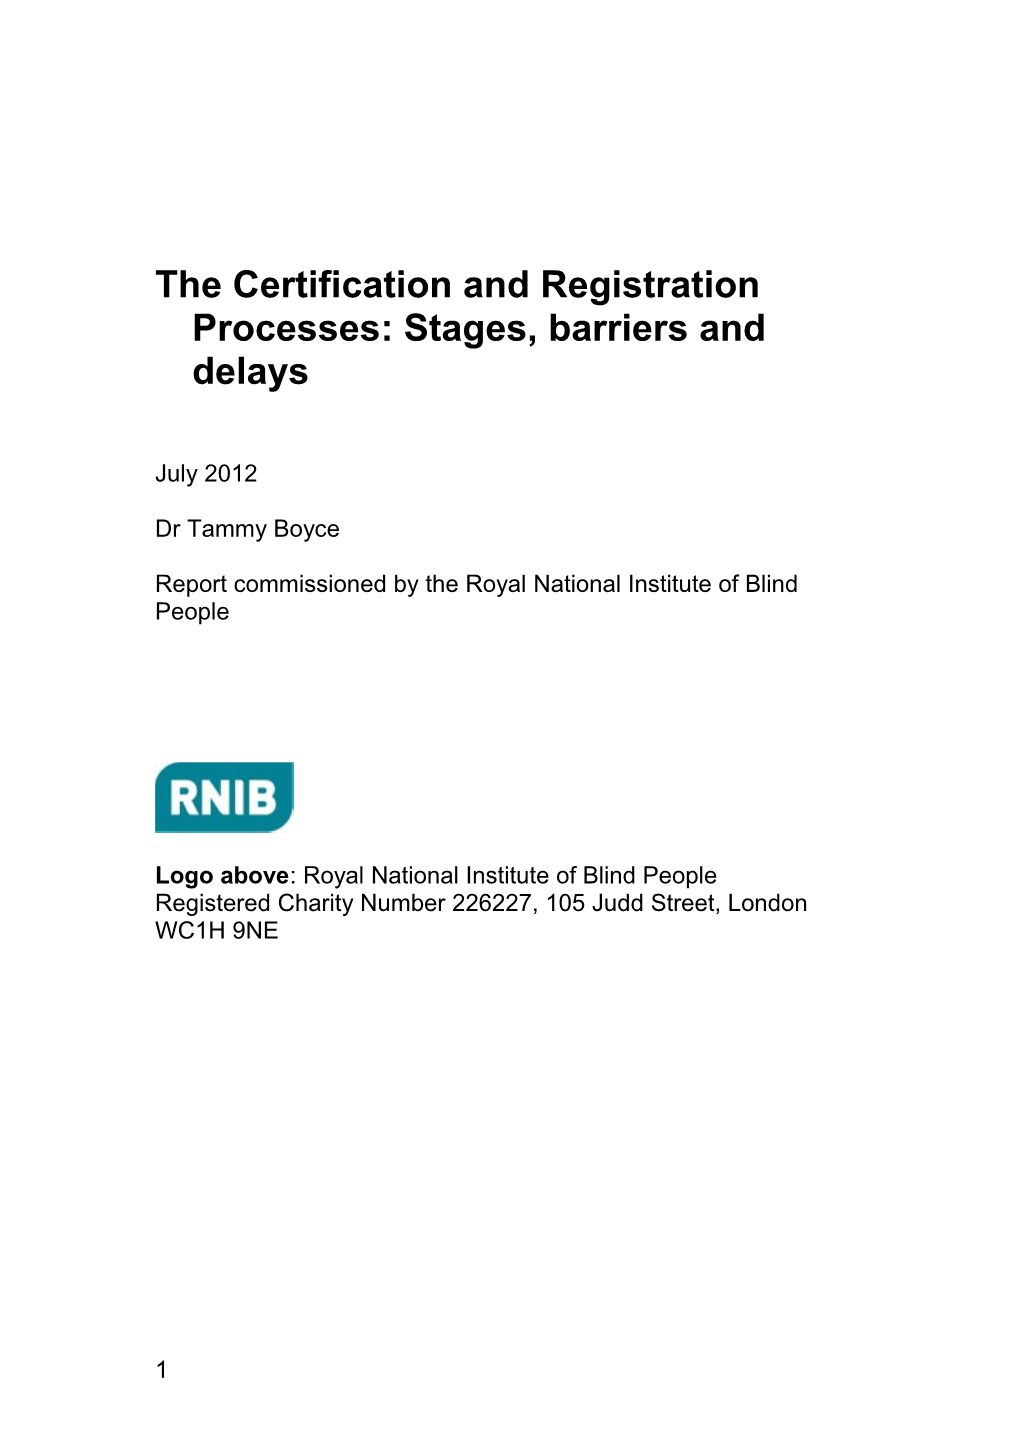 The Certification and Registration Processes - Full Report